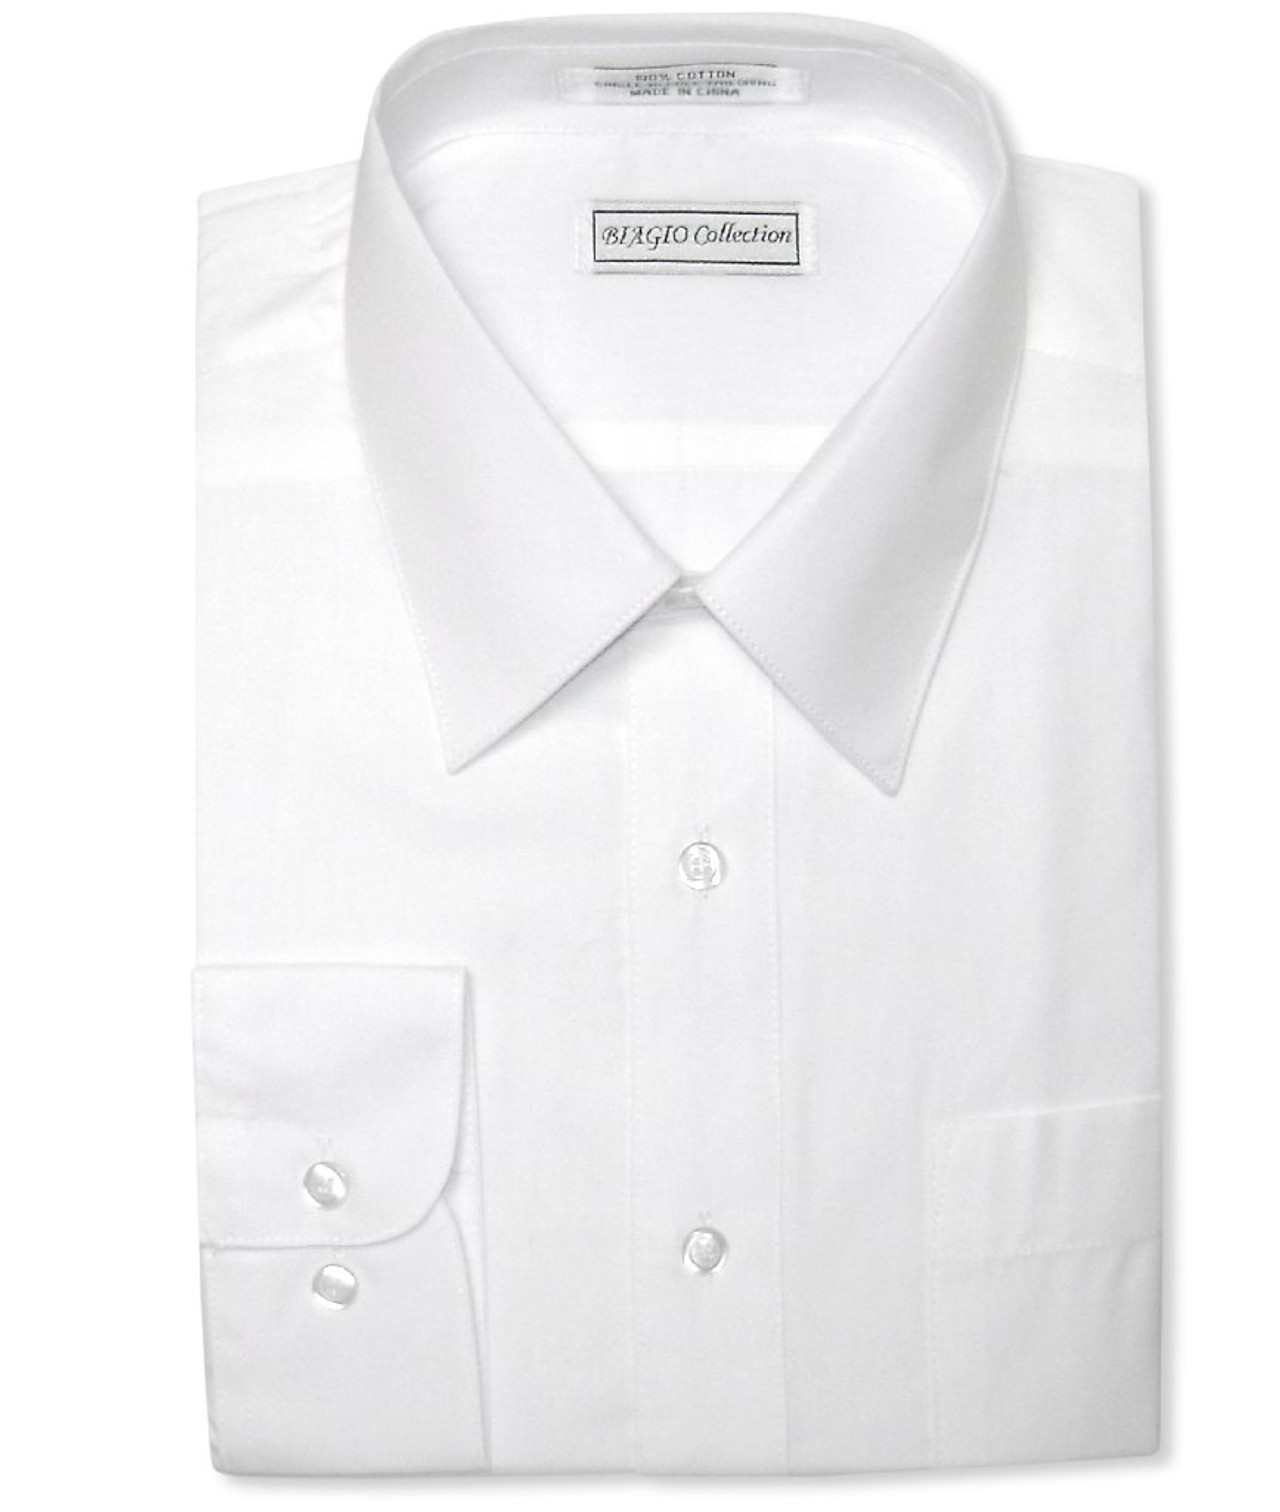 Convertible Cuffs | Solid White Cotton Dress Shirt By Biagio